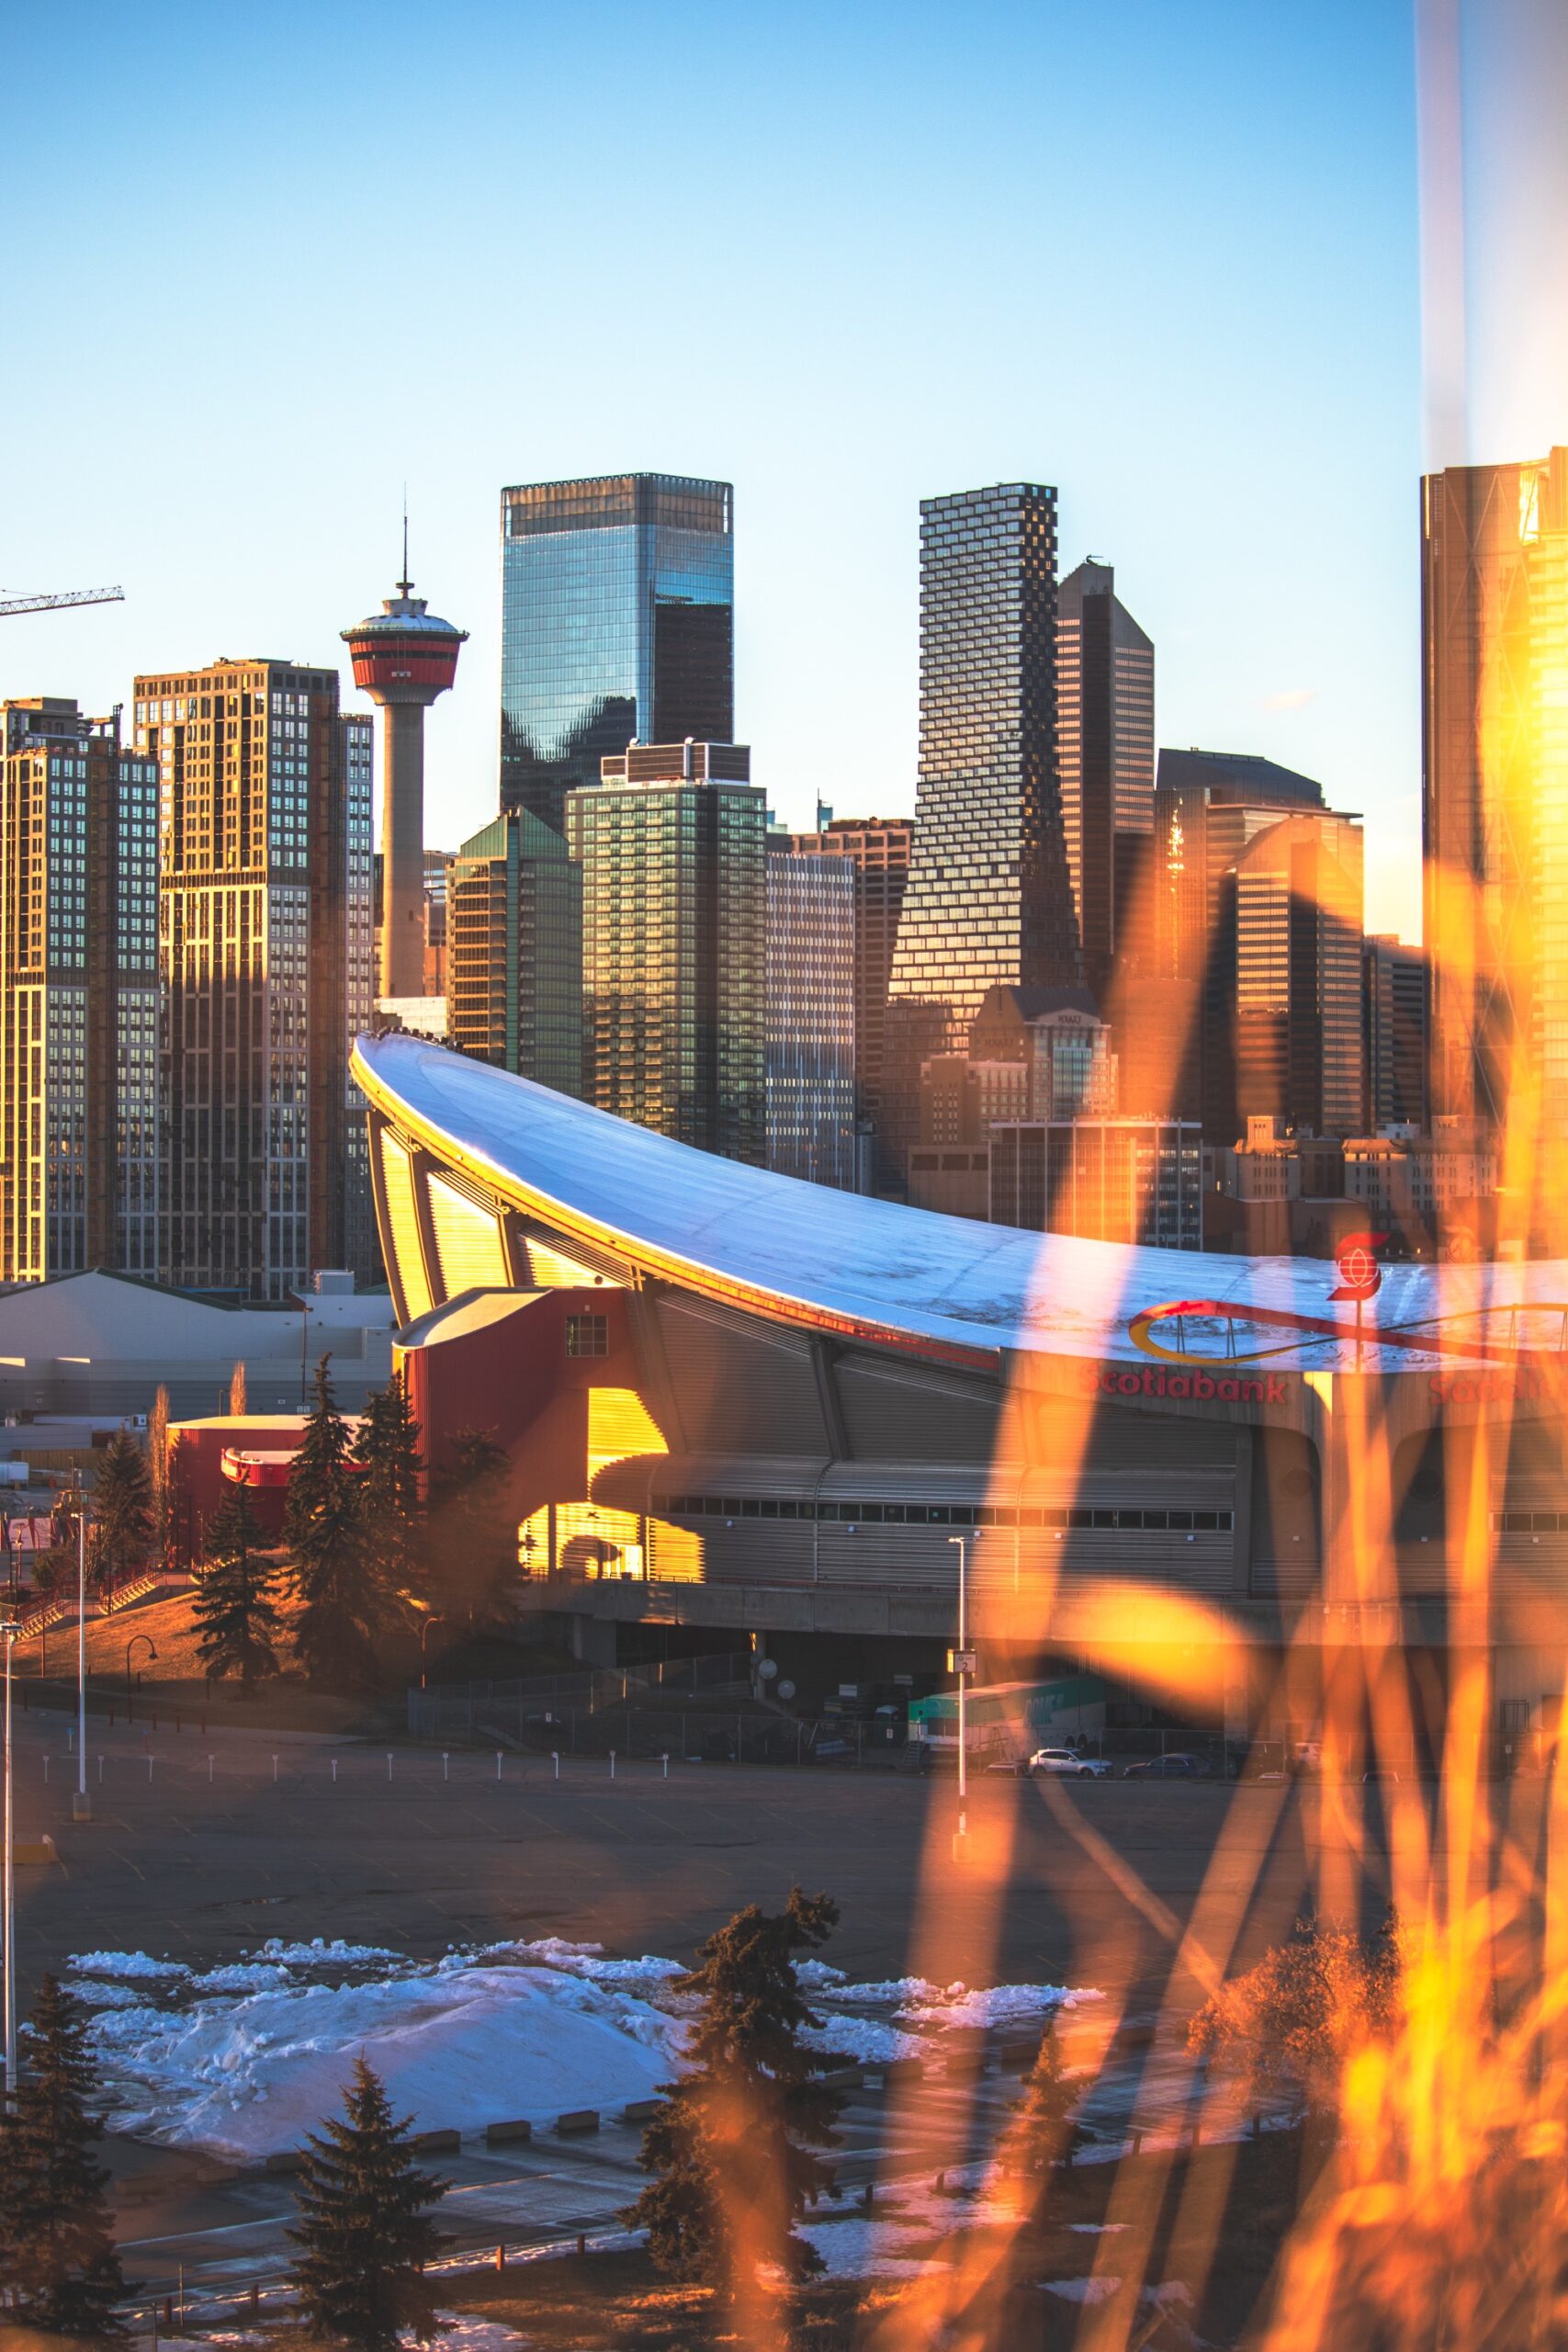 Why are more investors and immigrants moving to Calgary?